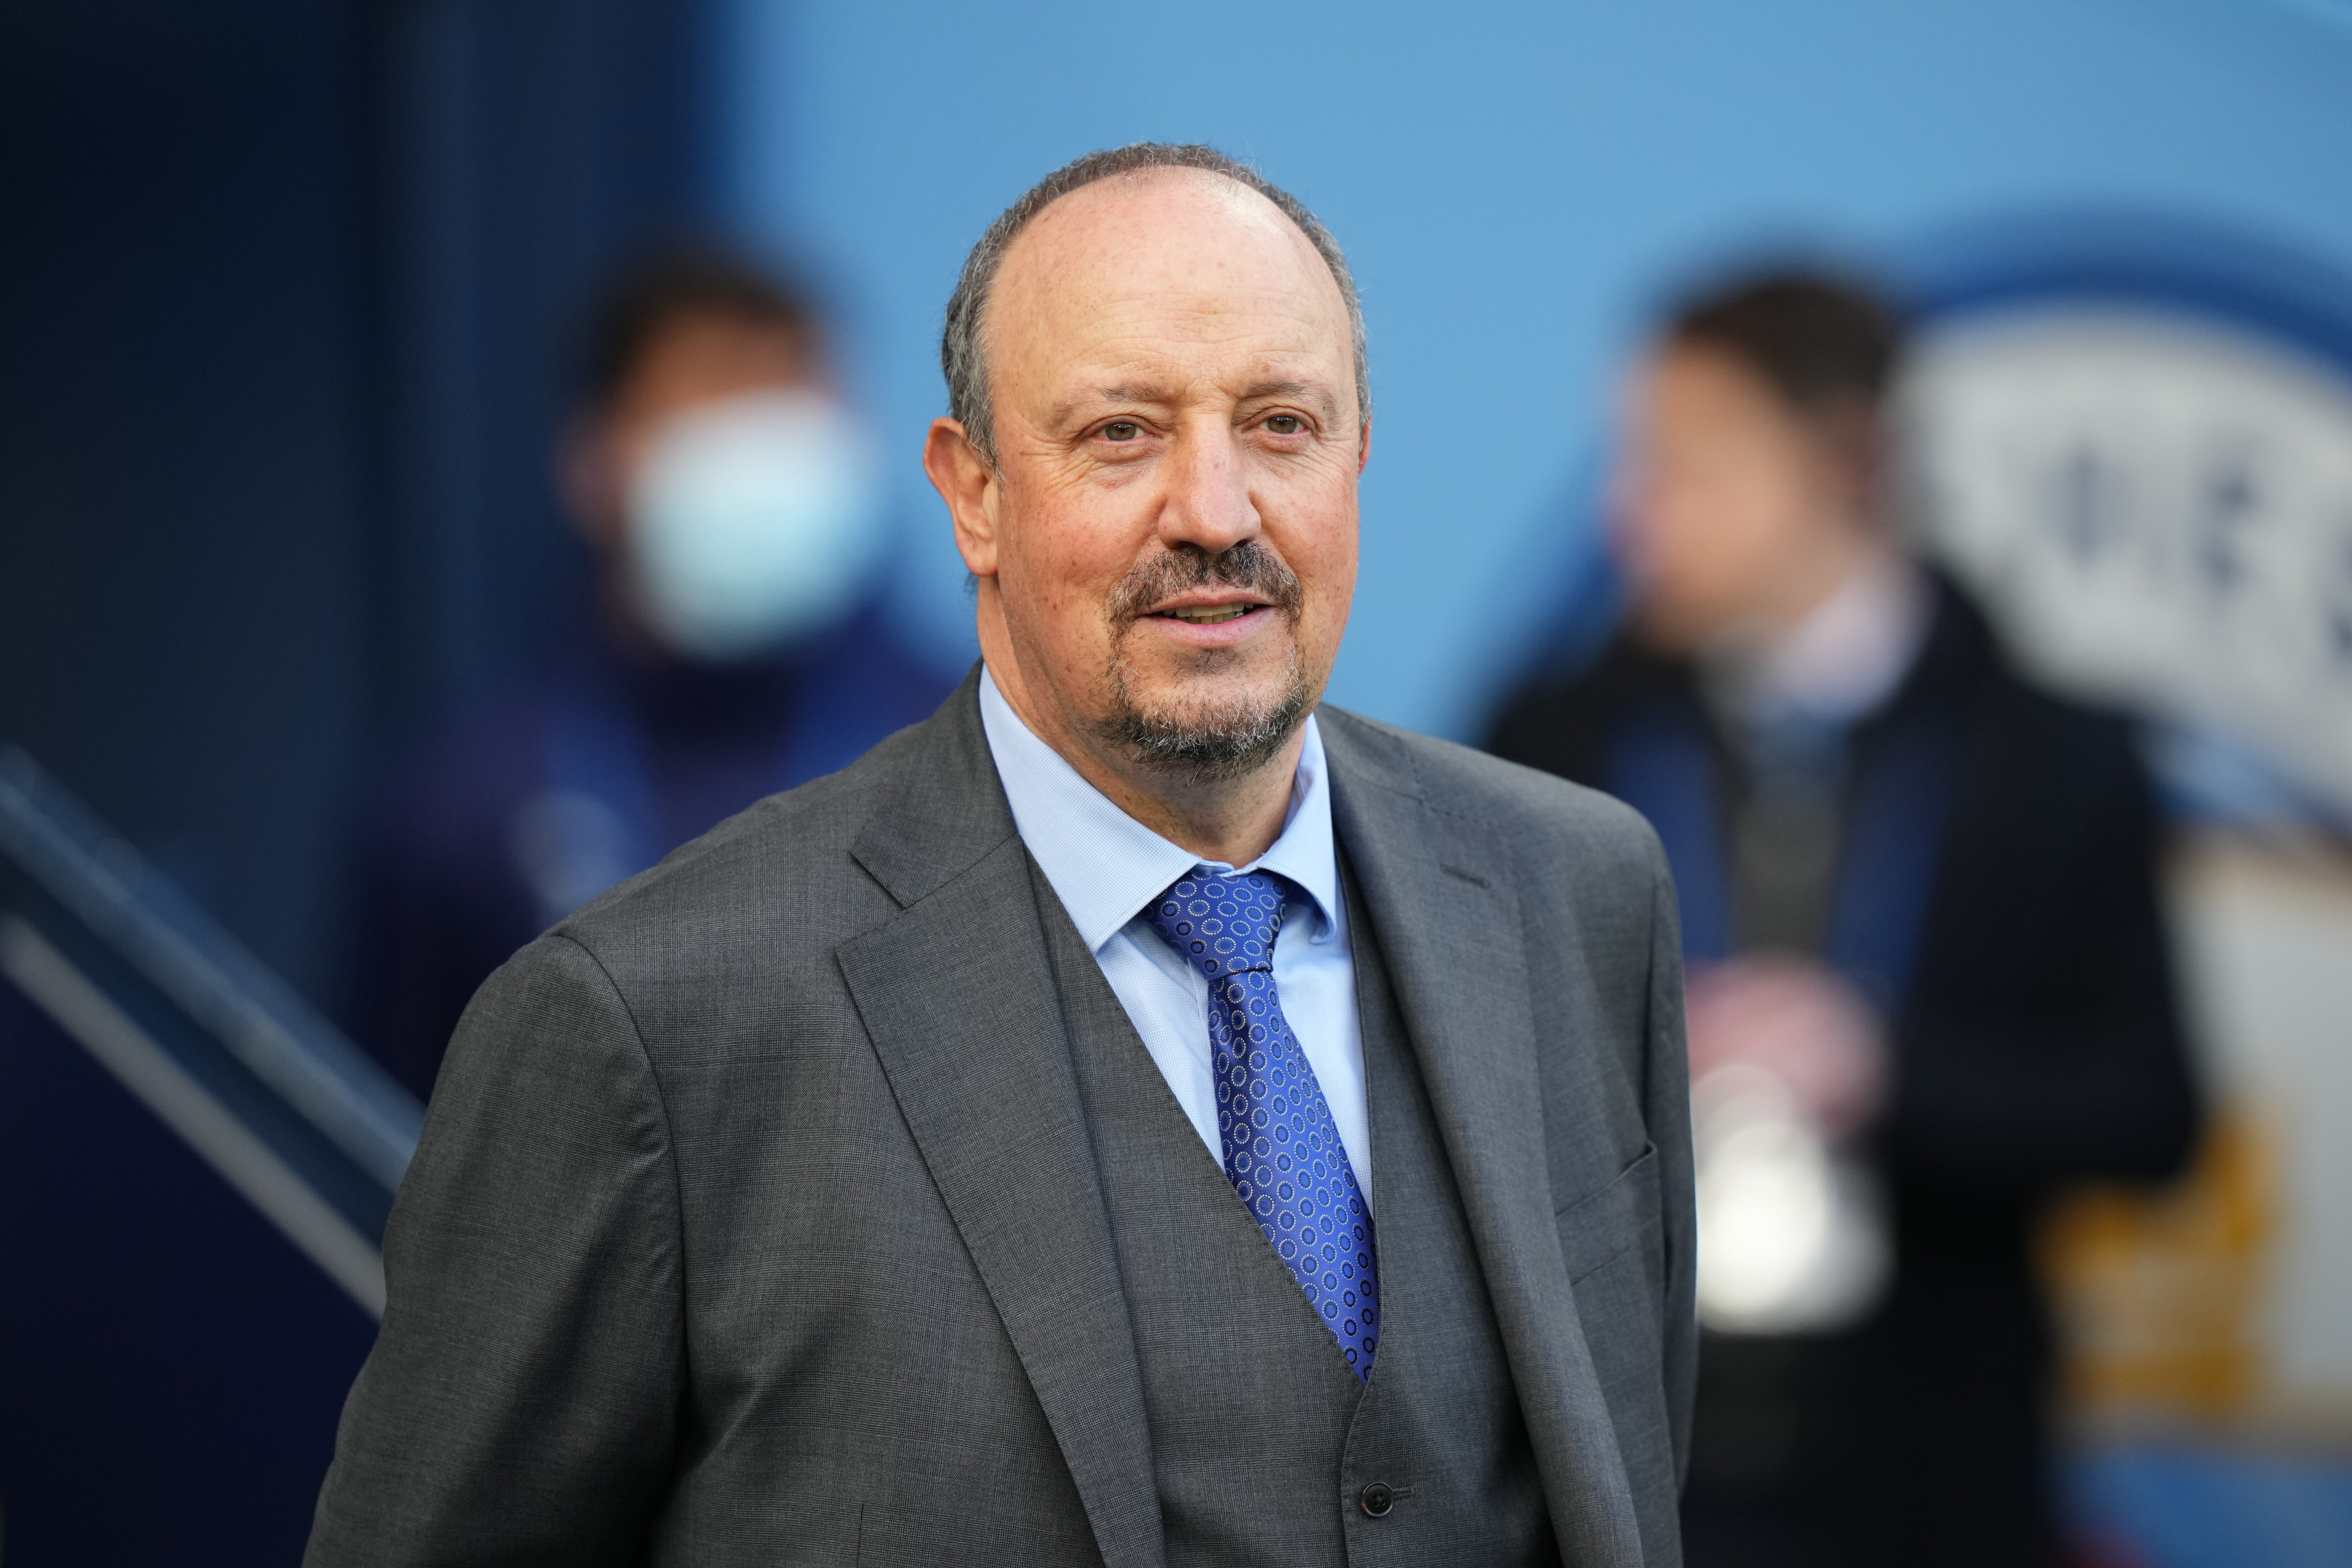 Rafael Benitez is under immense pressure to get a result against his former club